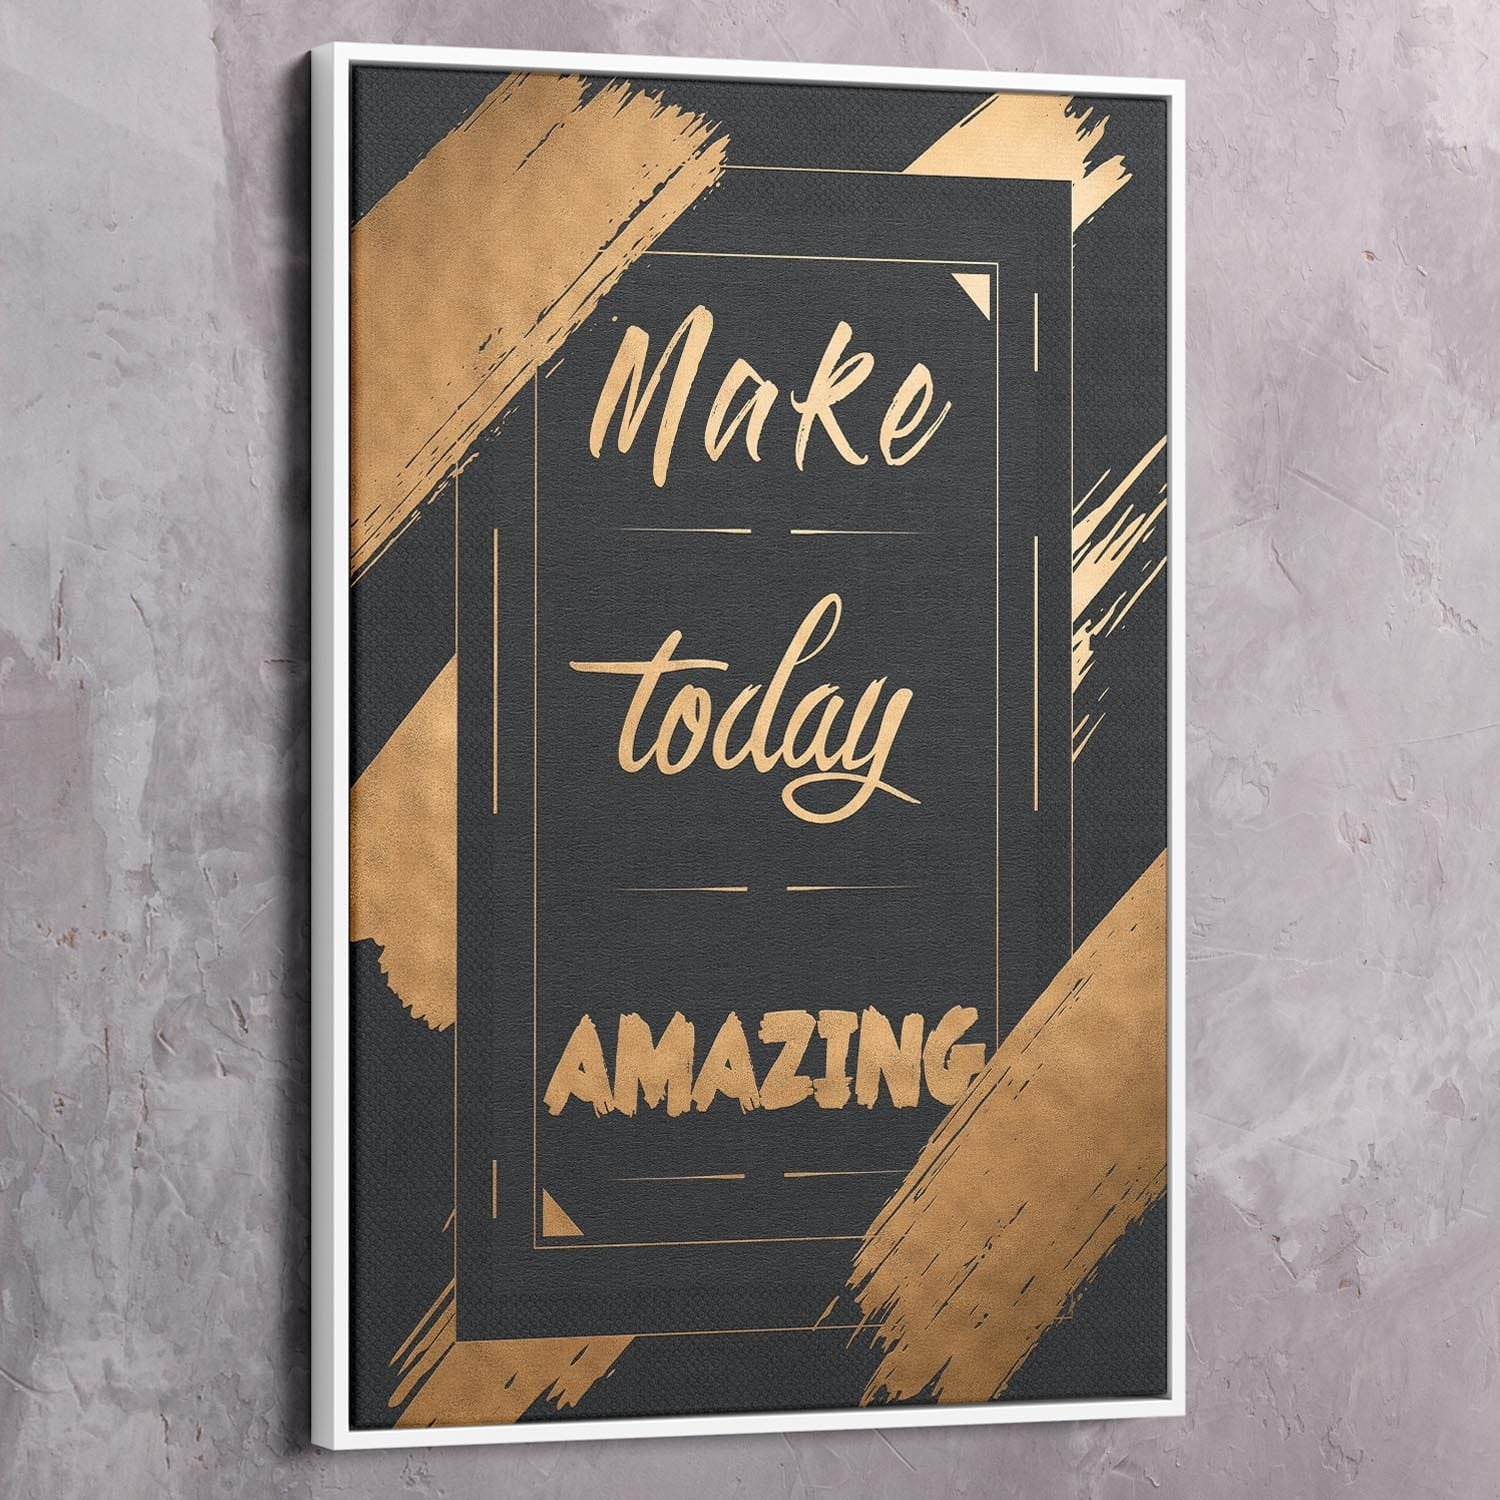 Make Today Amazing Wall Art | Inspirational Wall Art Motivational Wall Art Quotes Office Art | ImpaktMaker Exclusive Canvas Art Portrait